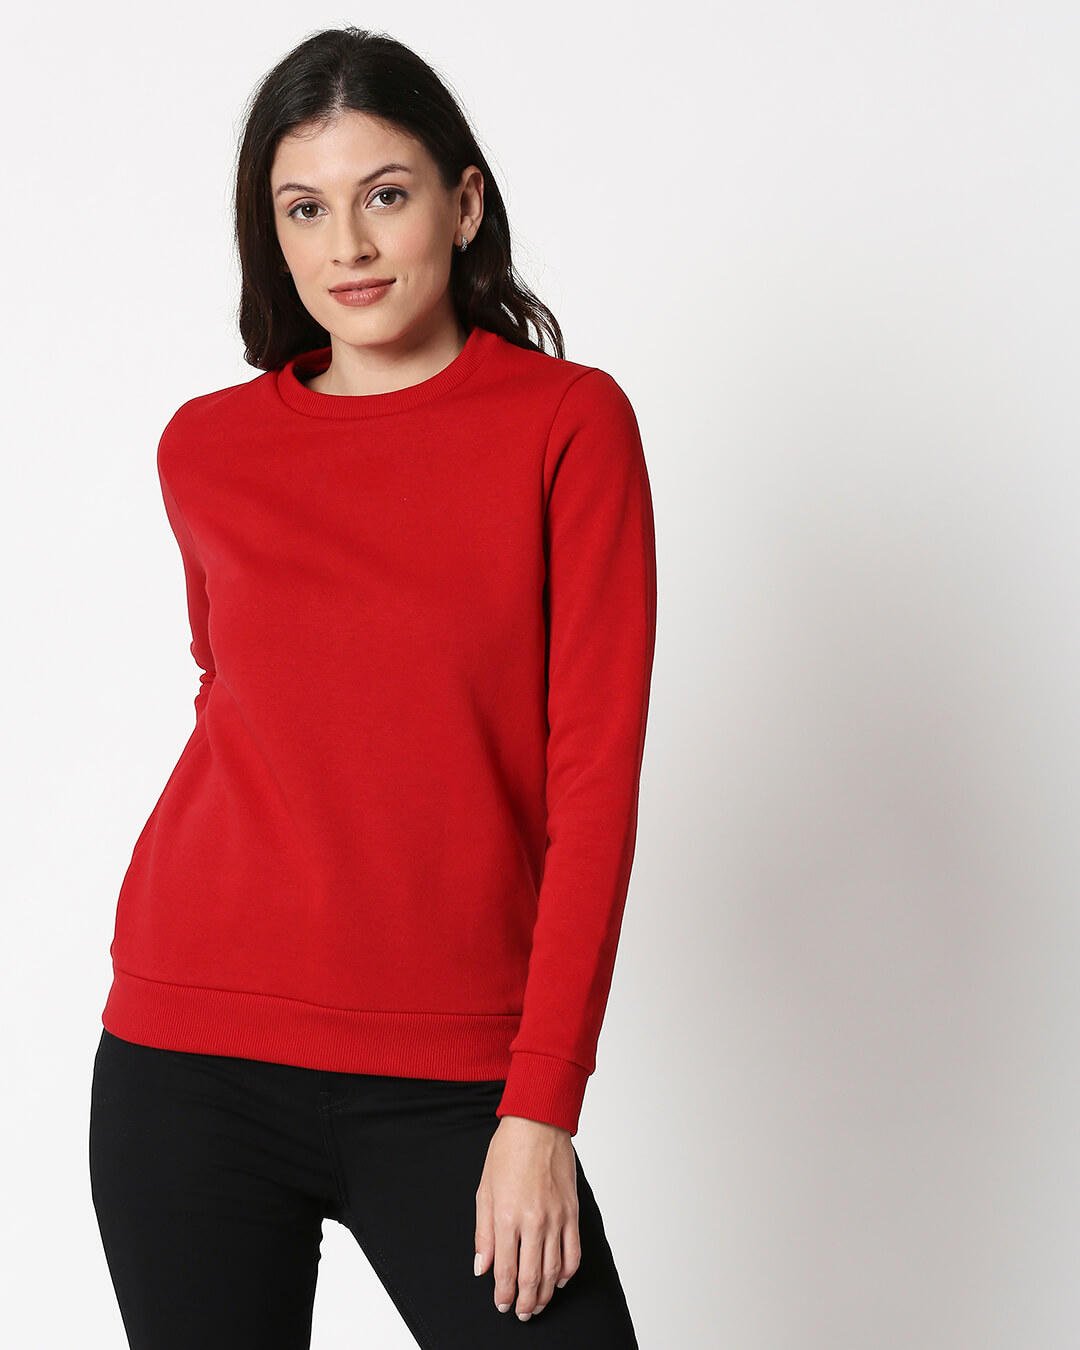 Bold Red Sweater